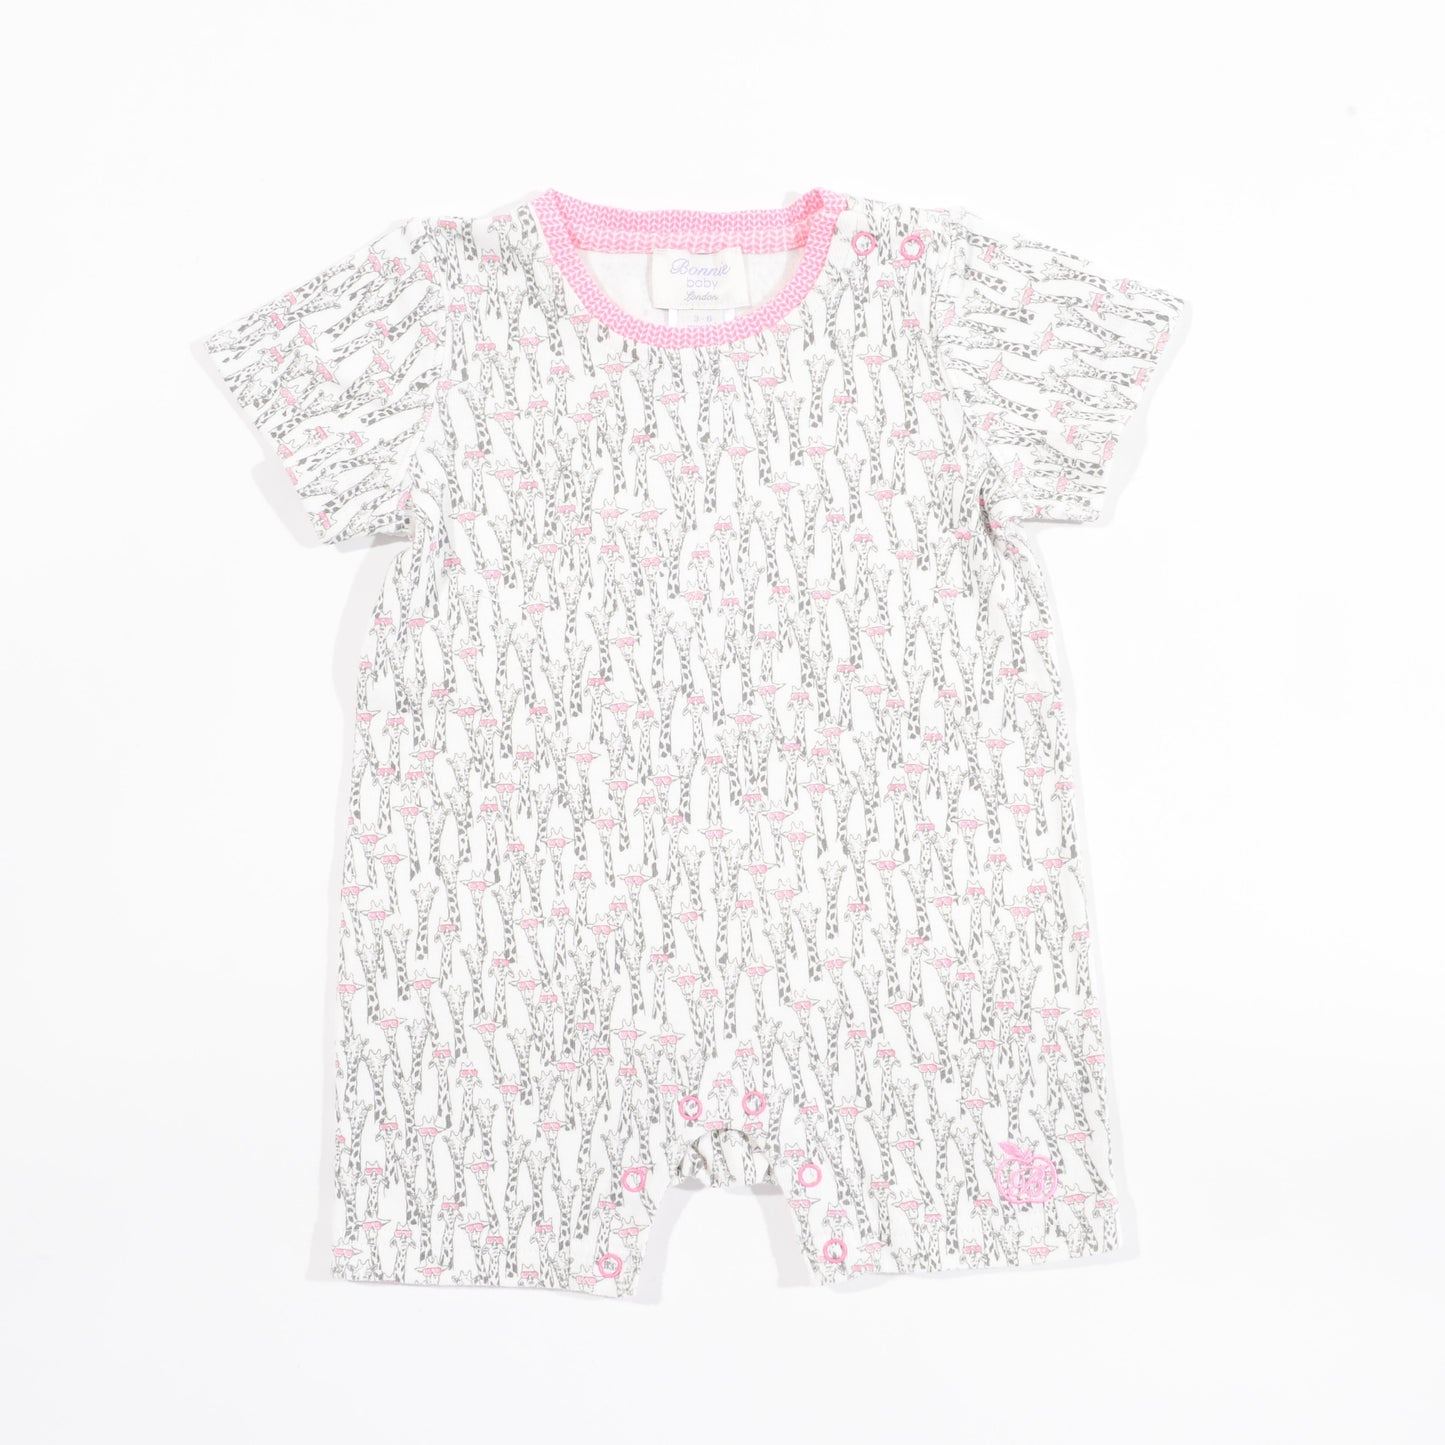 BBA-116 - Baby - Playsuit - PINK